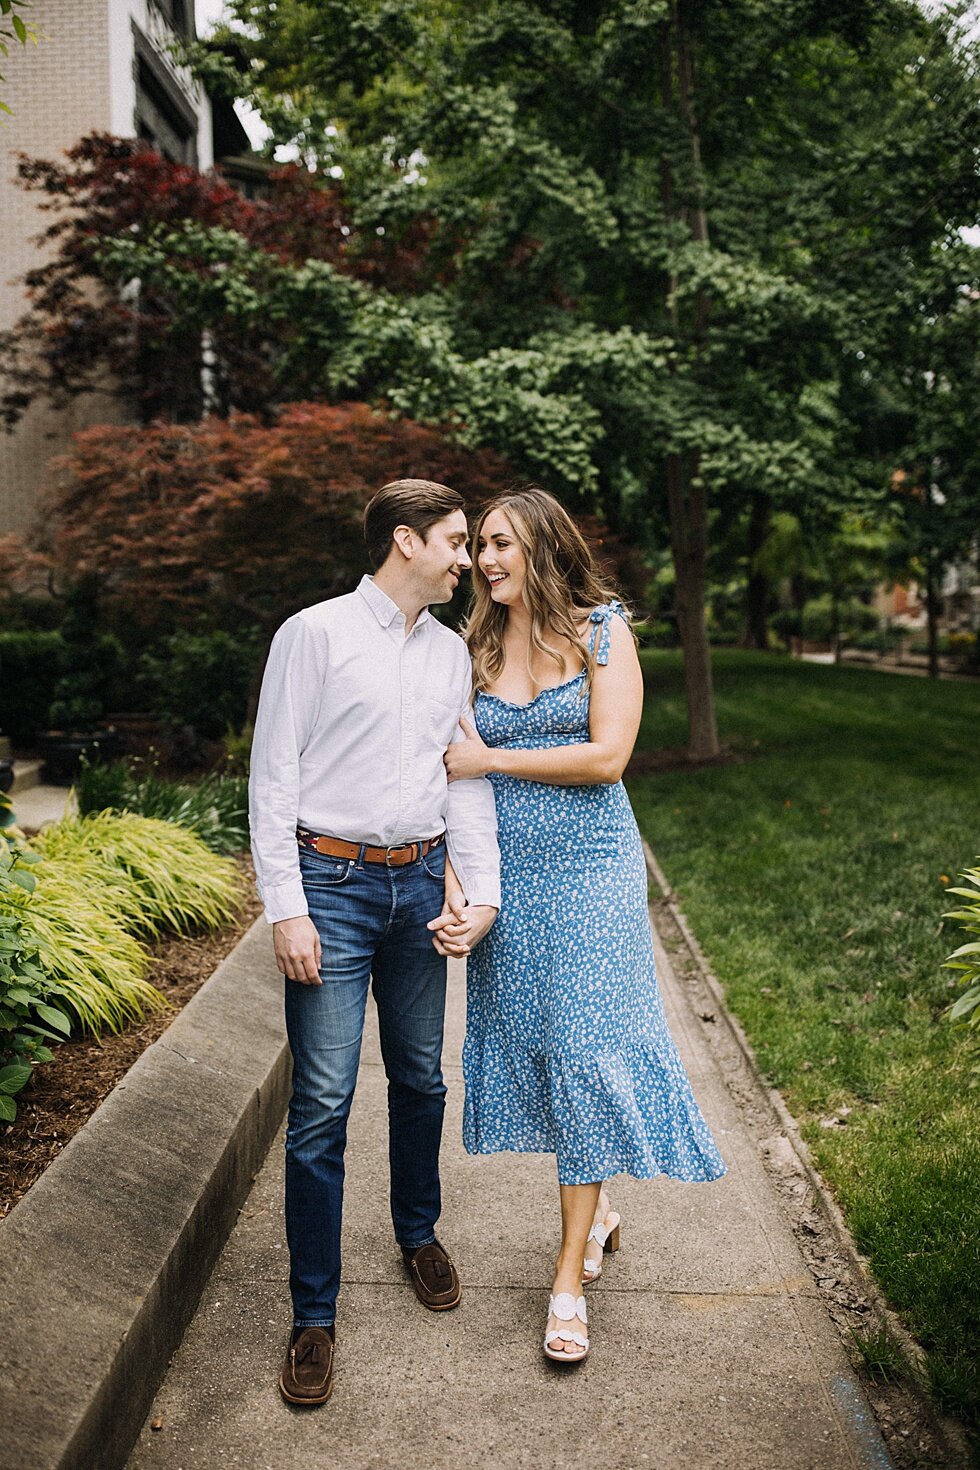  Arm in arm this wonderful engaged couple could not contain their excitement or their love as we took their summer engagement photos at St James Court! #engagementphotos #savethedatephotos #savethedates #engagementphotography  #StJamesCourt #gardenen